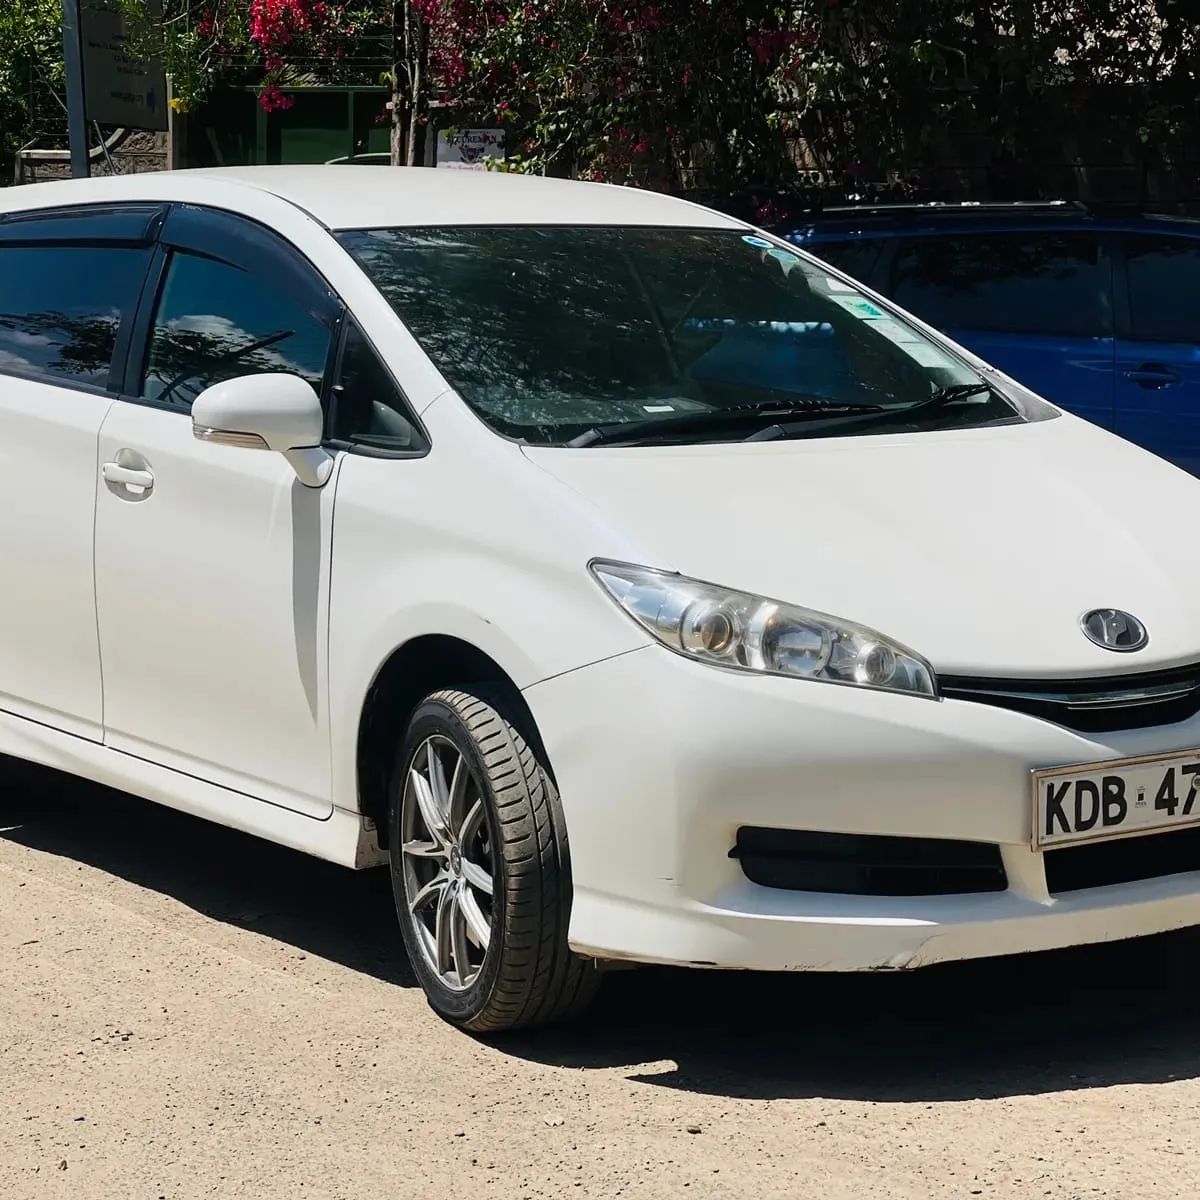 Cars For Sale/Vehicles Cars-Toyota WISH New Shape You Pay 30% Deposit Trade in OK Wow 8